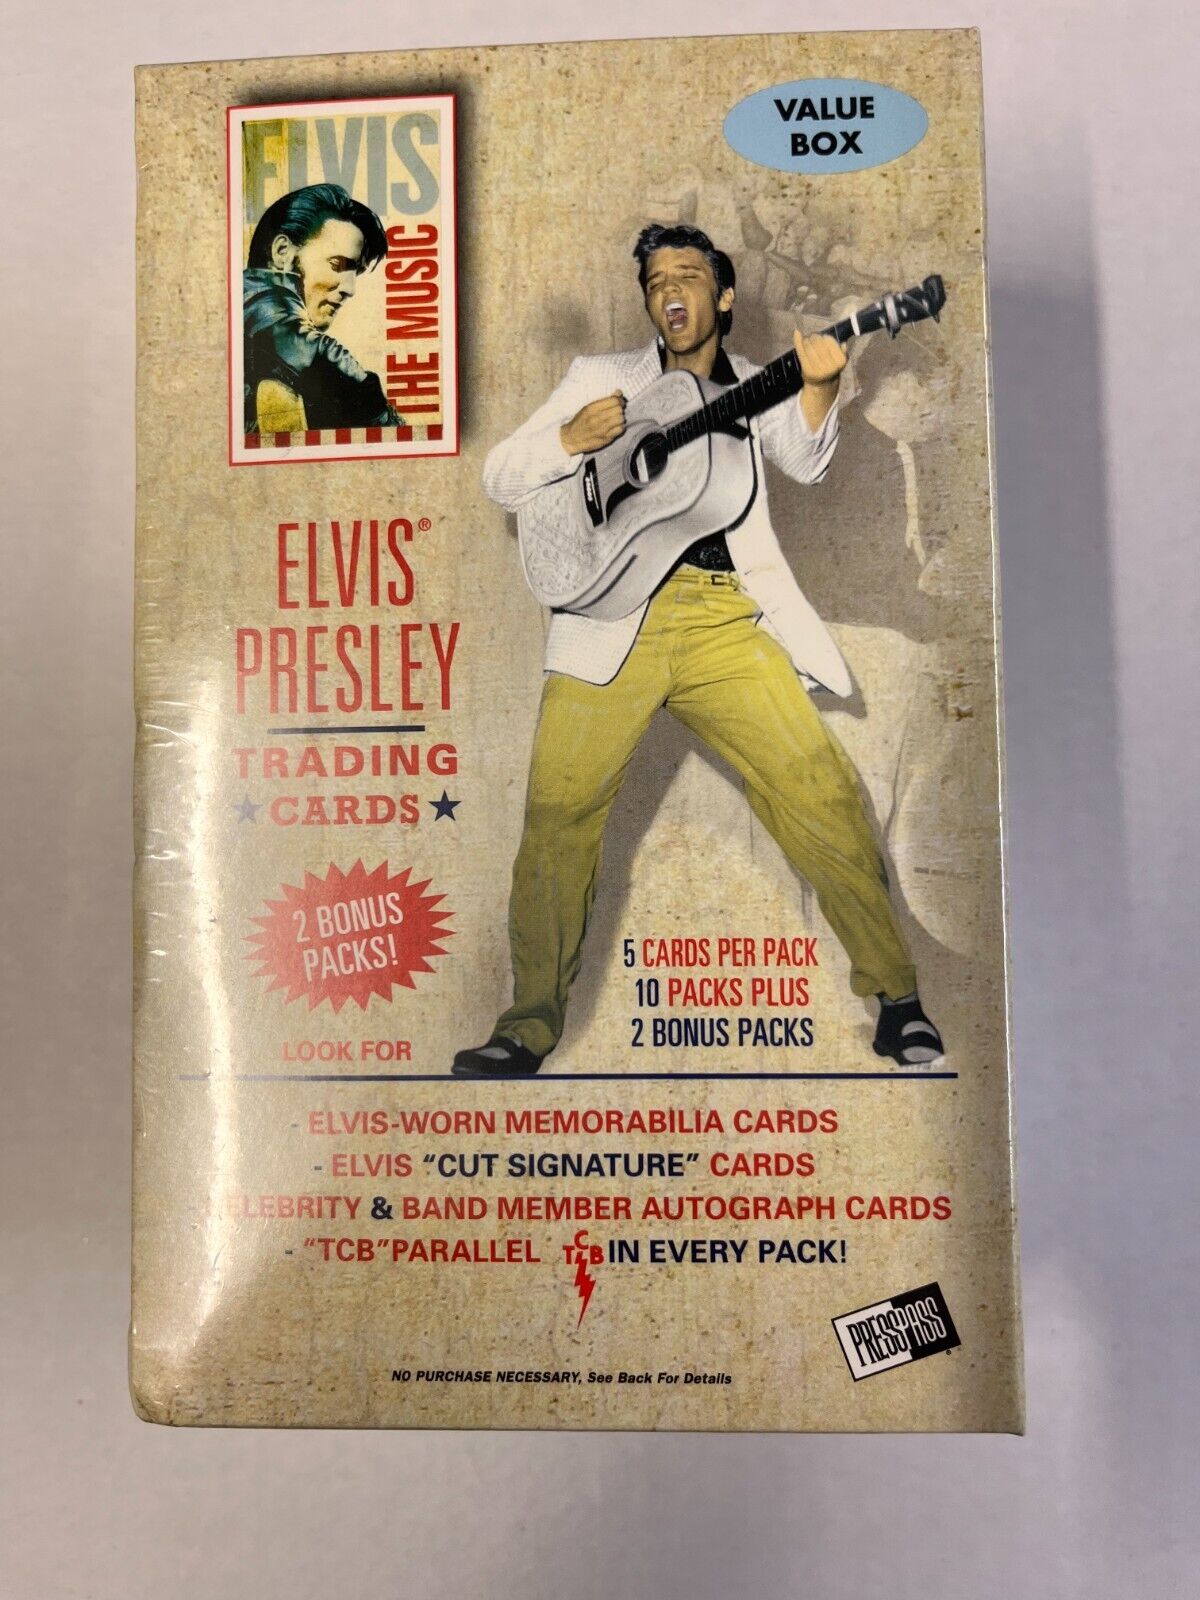 New ELVIS PRESLEY 2007 Press Pass Trading Cards 12 Pack Box Factory Sealed